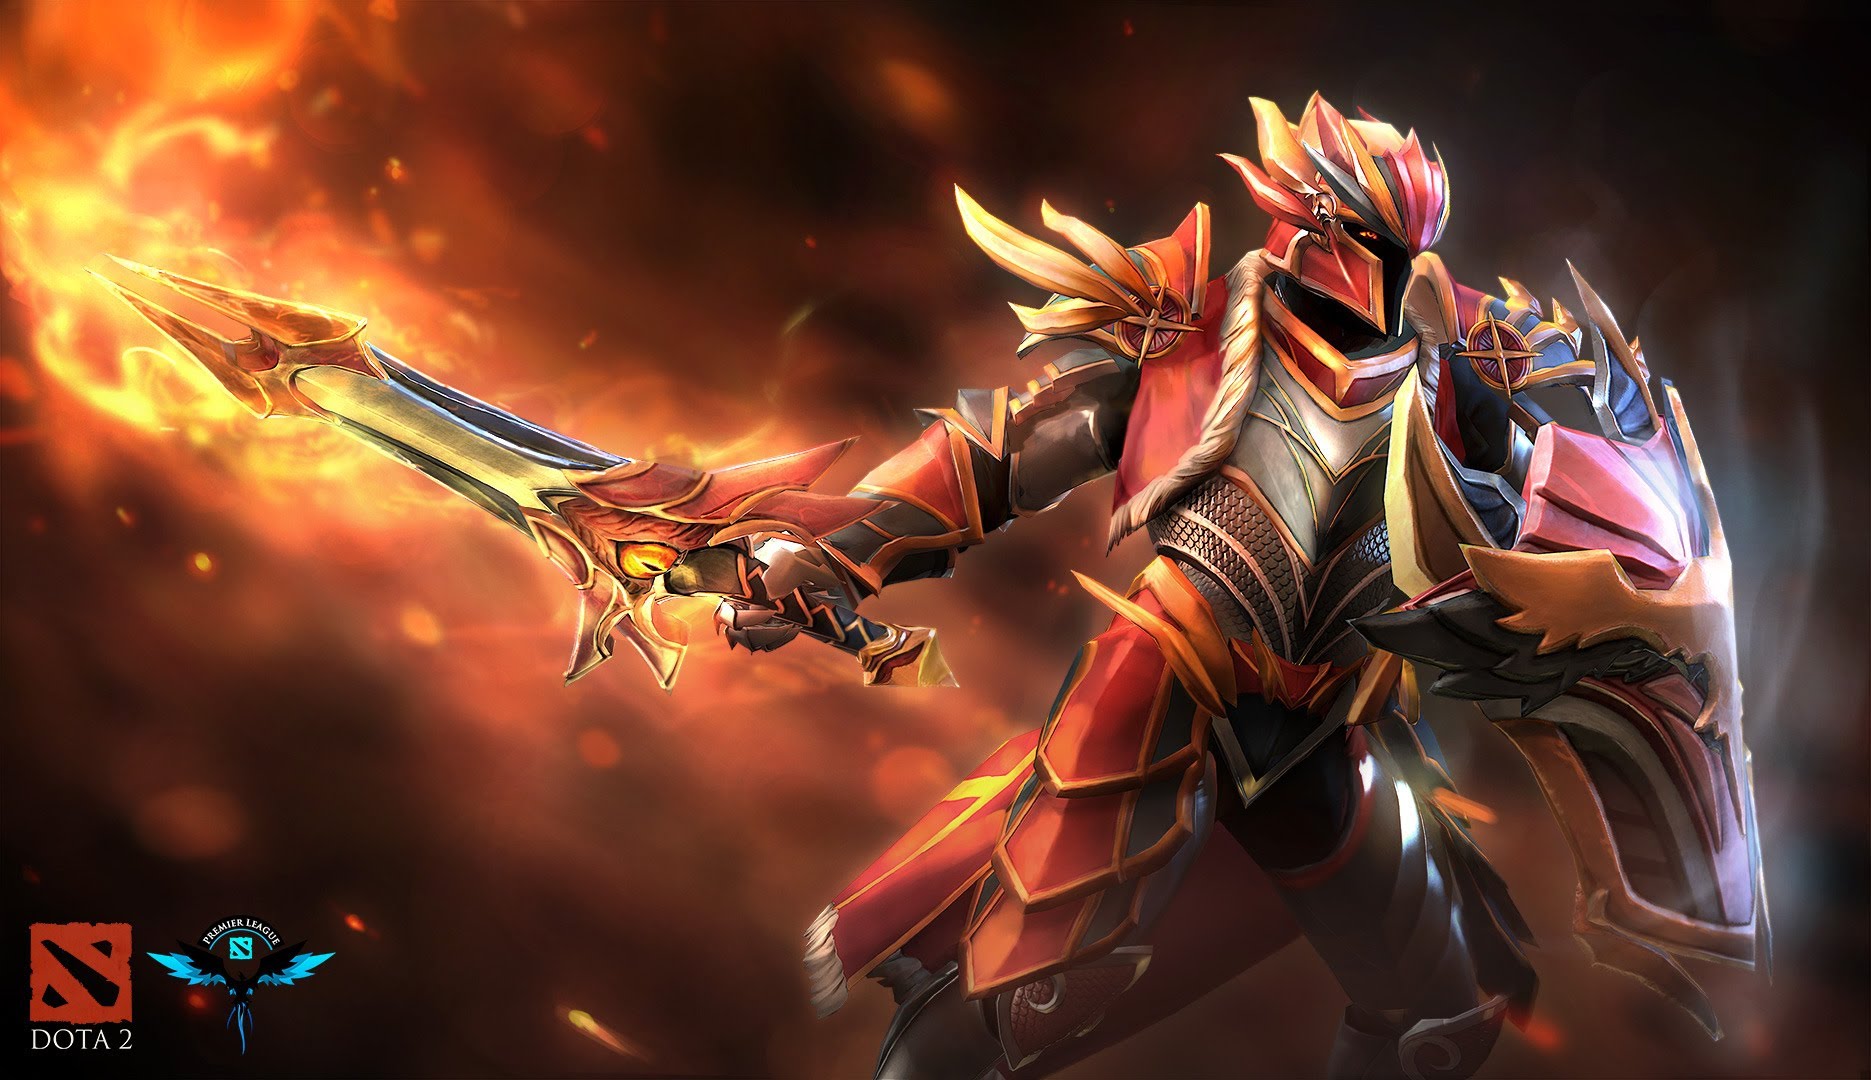 DotA 2 Wallpaper and Background Image  1871x1080  ID:548107